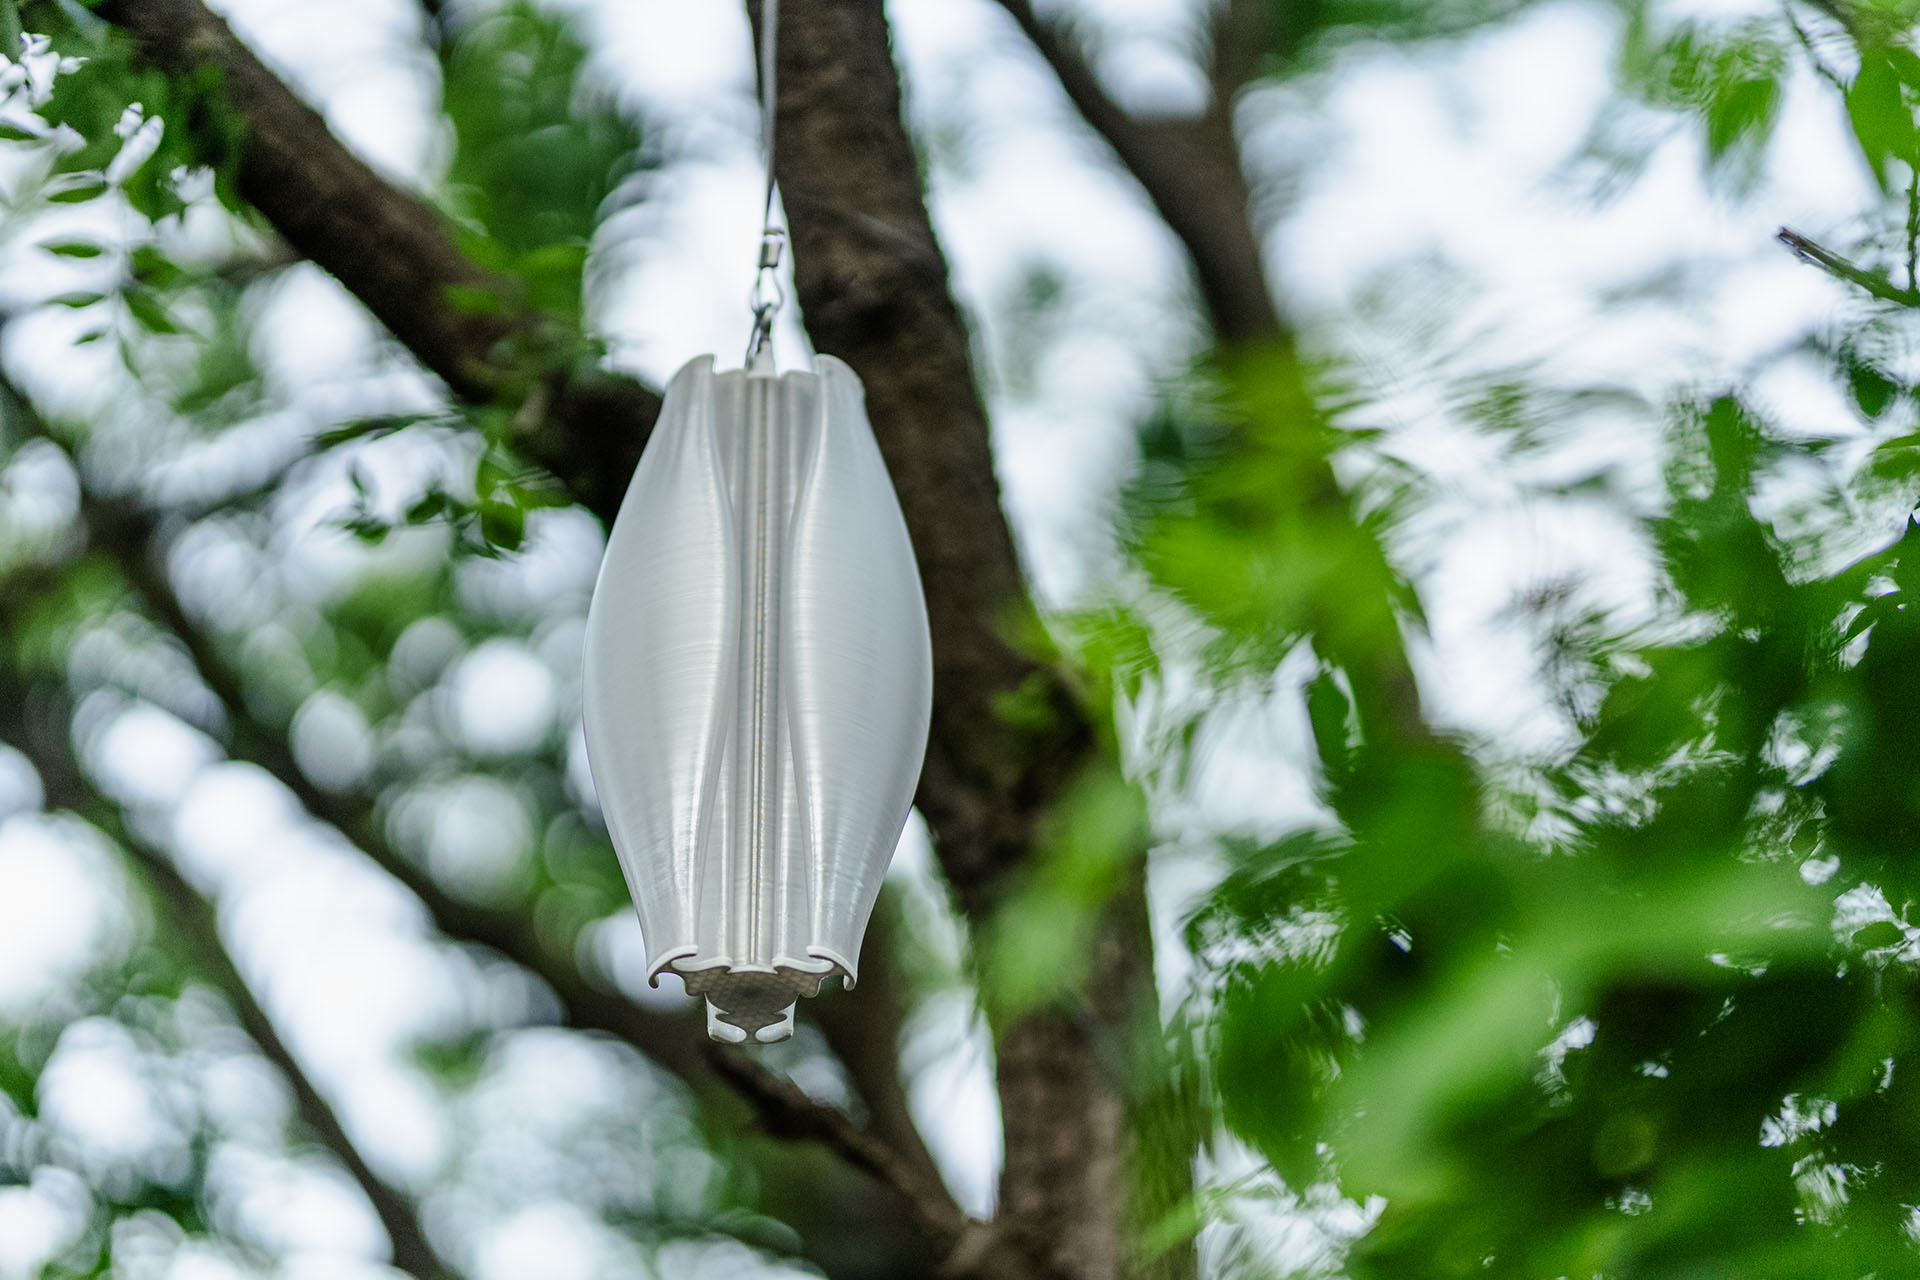 Satellite product hanging from tree.